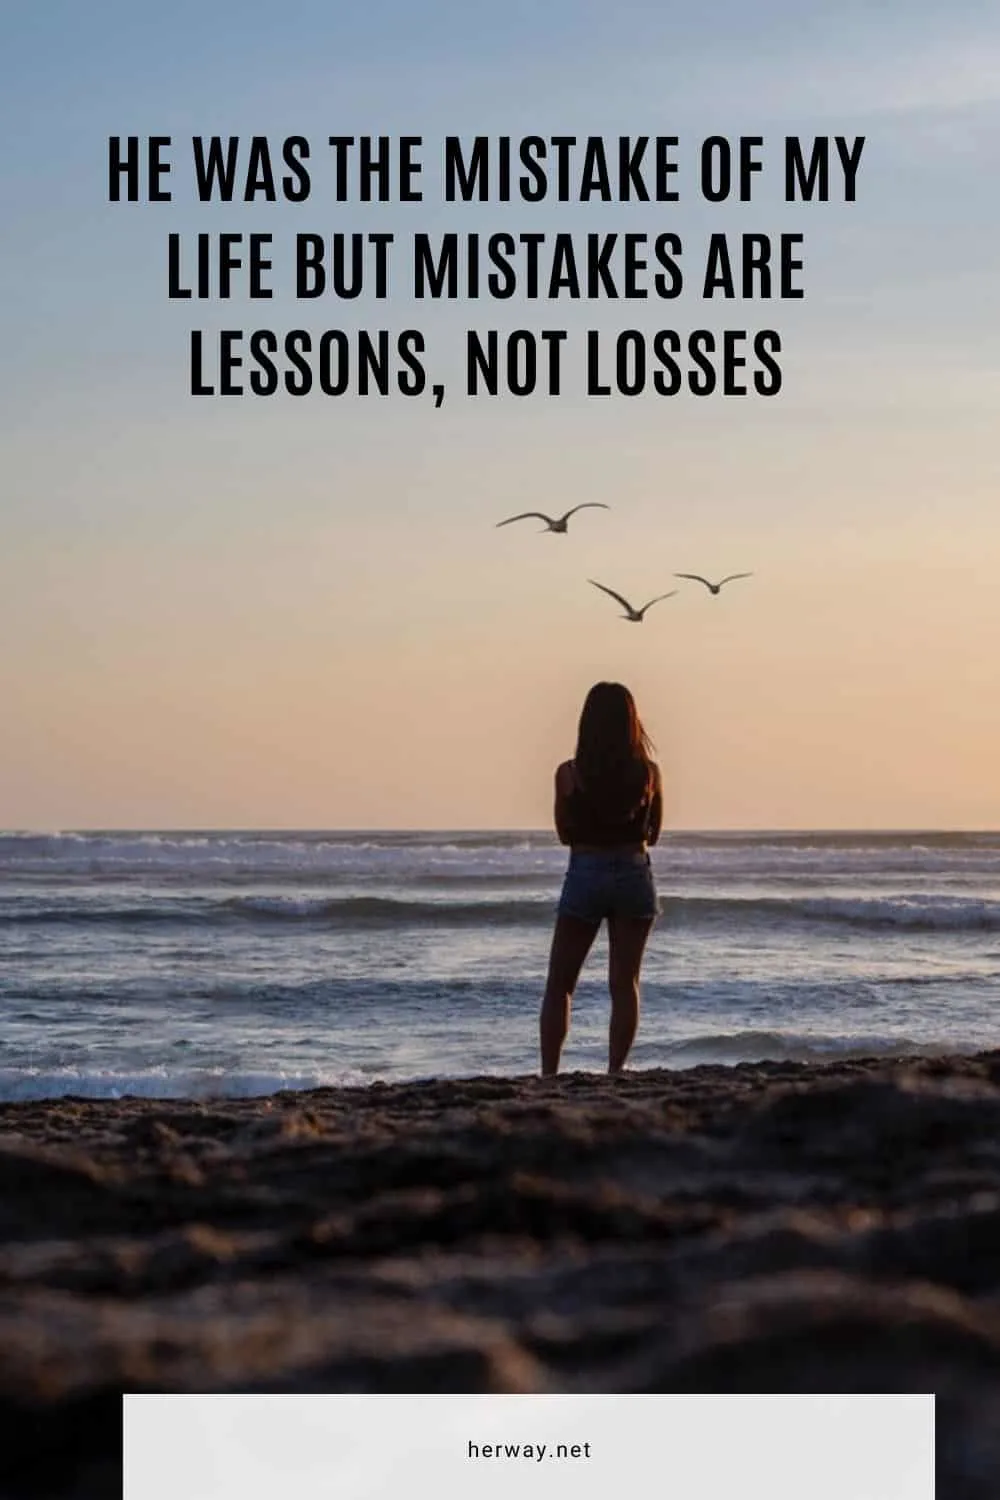 He Was The Mistake Of My Life But Mistakes Are Lessons, Not Losses